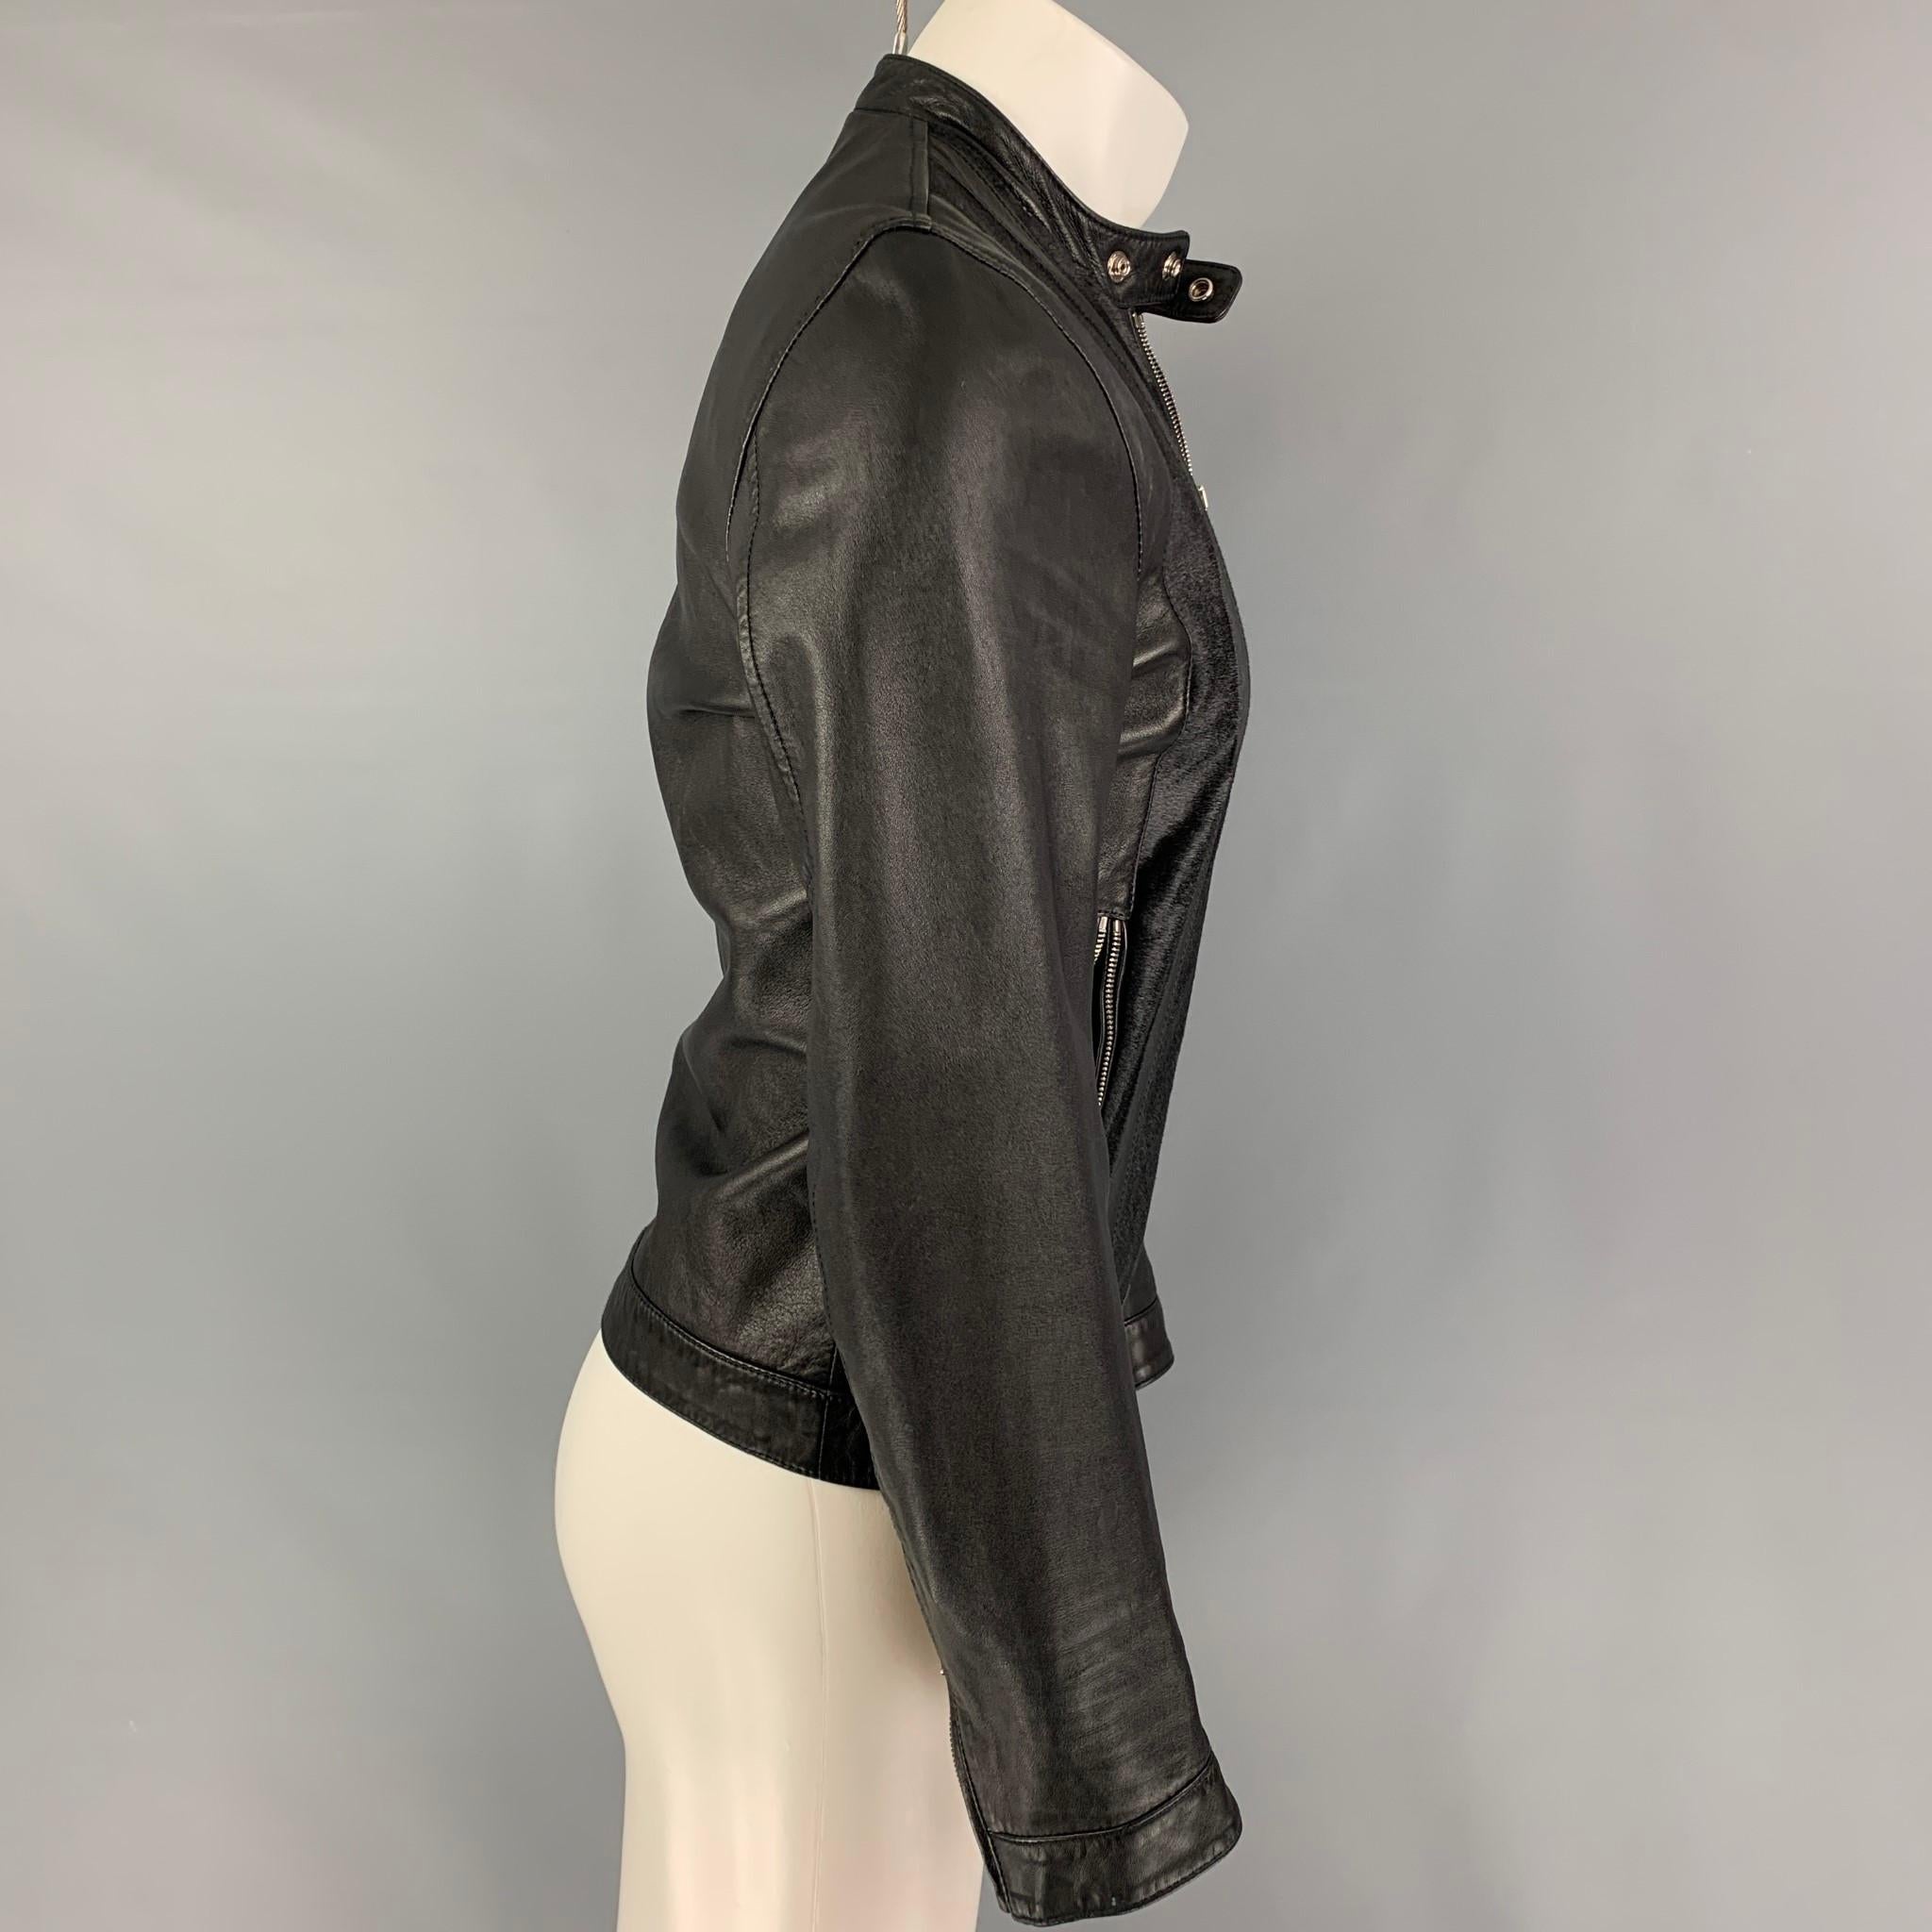 DSQUARED2 jacket comes in a black leather featuring a textured panel detail, zipped cuffs, zipper pockets, and a full zip up closure. Made in Italy. 

Good Pre-Owned Condition. Missing zipper detail. As-Is.
Marked: 46

Measurements:

Shoulder: 17